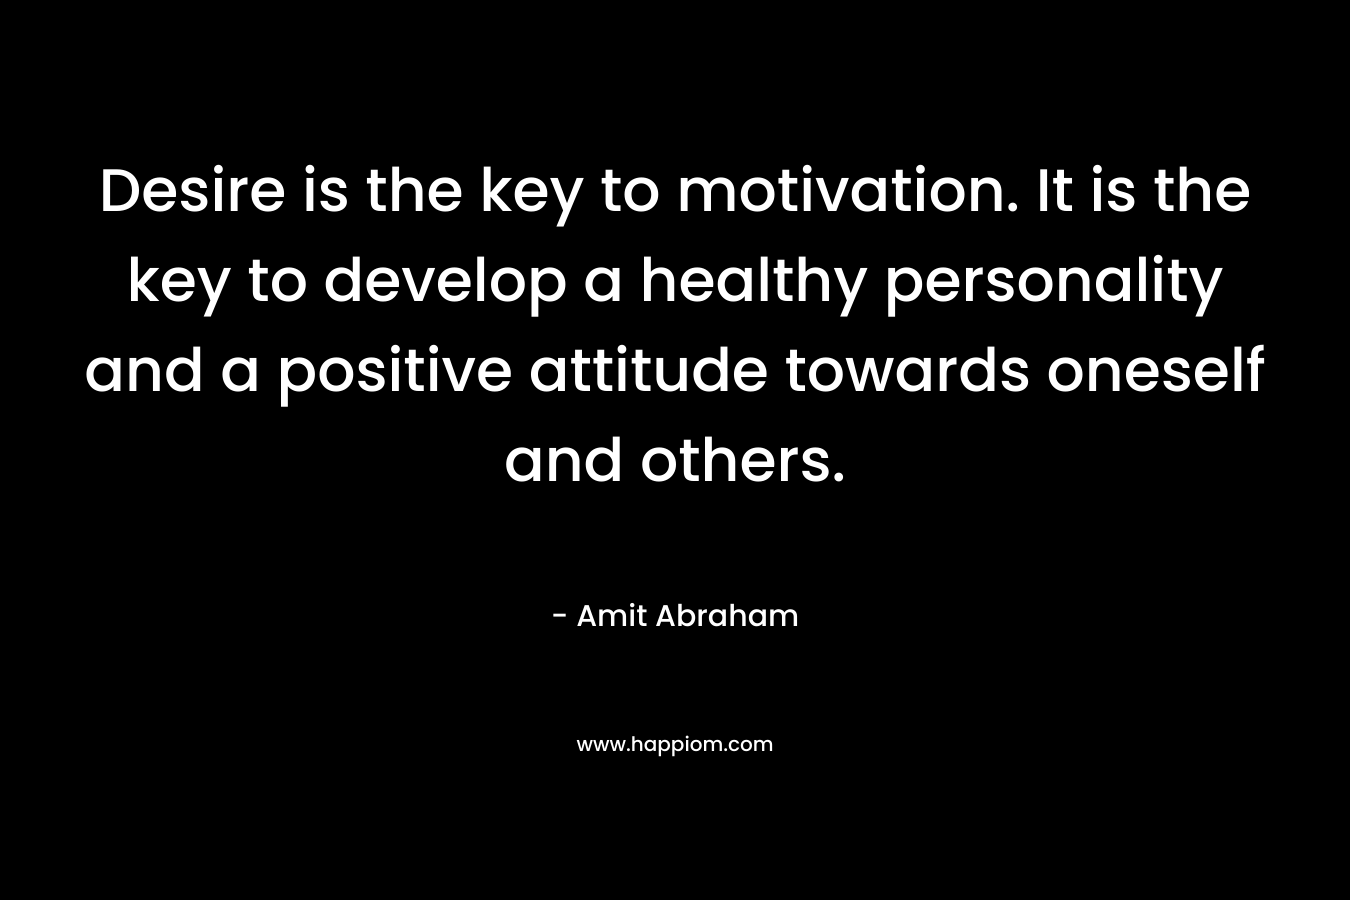 Desire is the key to motivation. It is the key to develop a healthy personality and a positive attitude towards oneself and others.